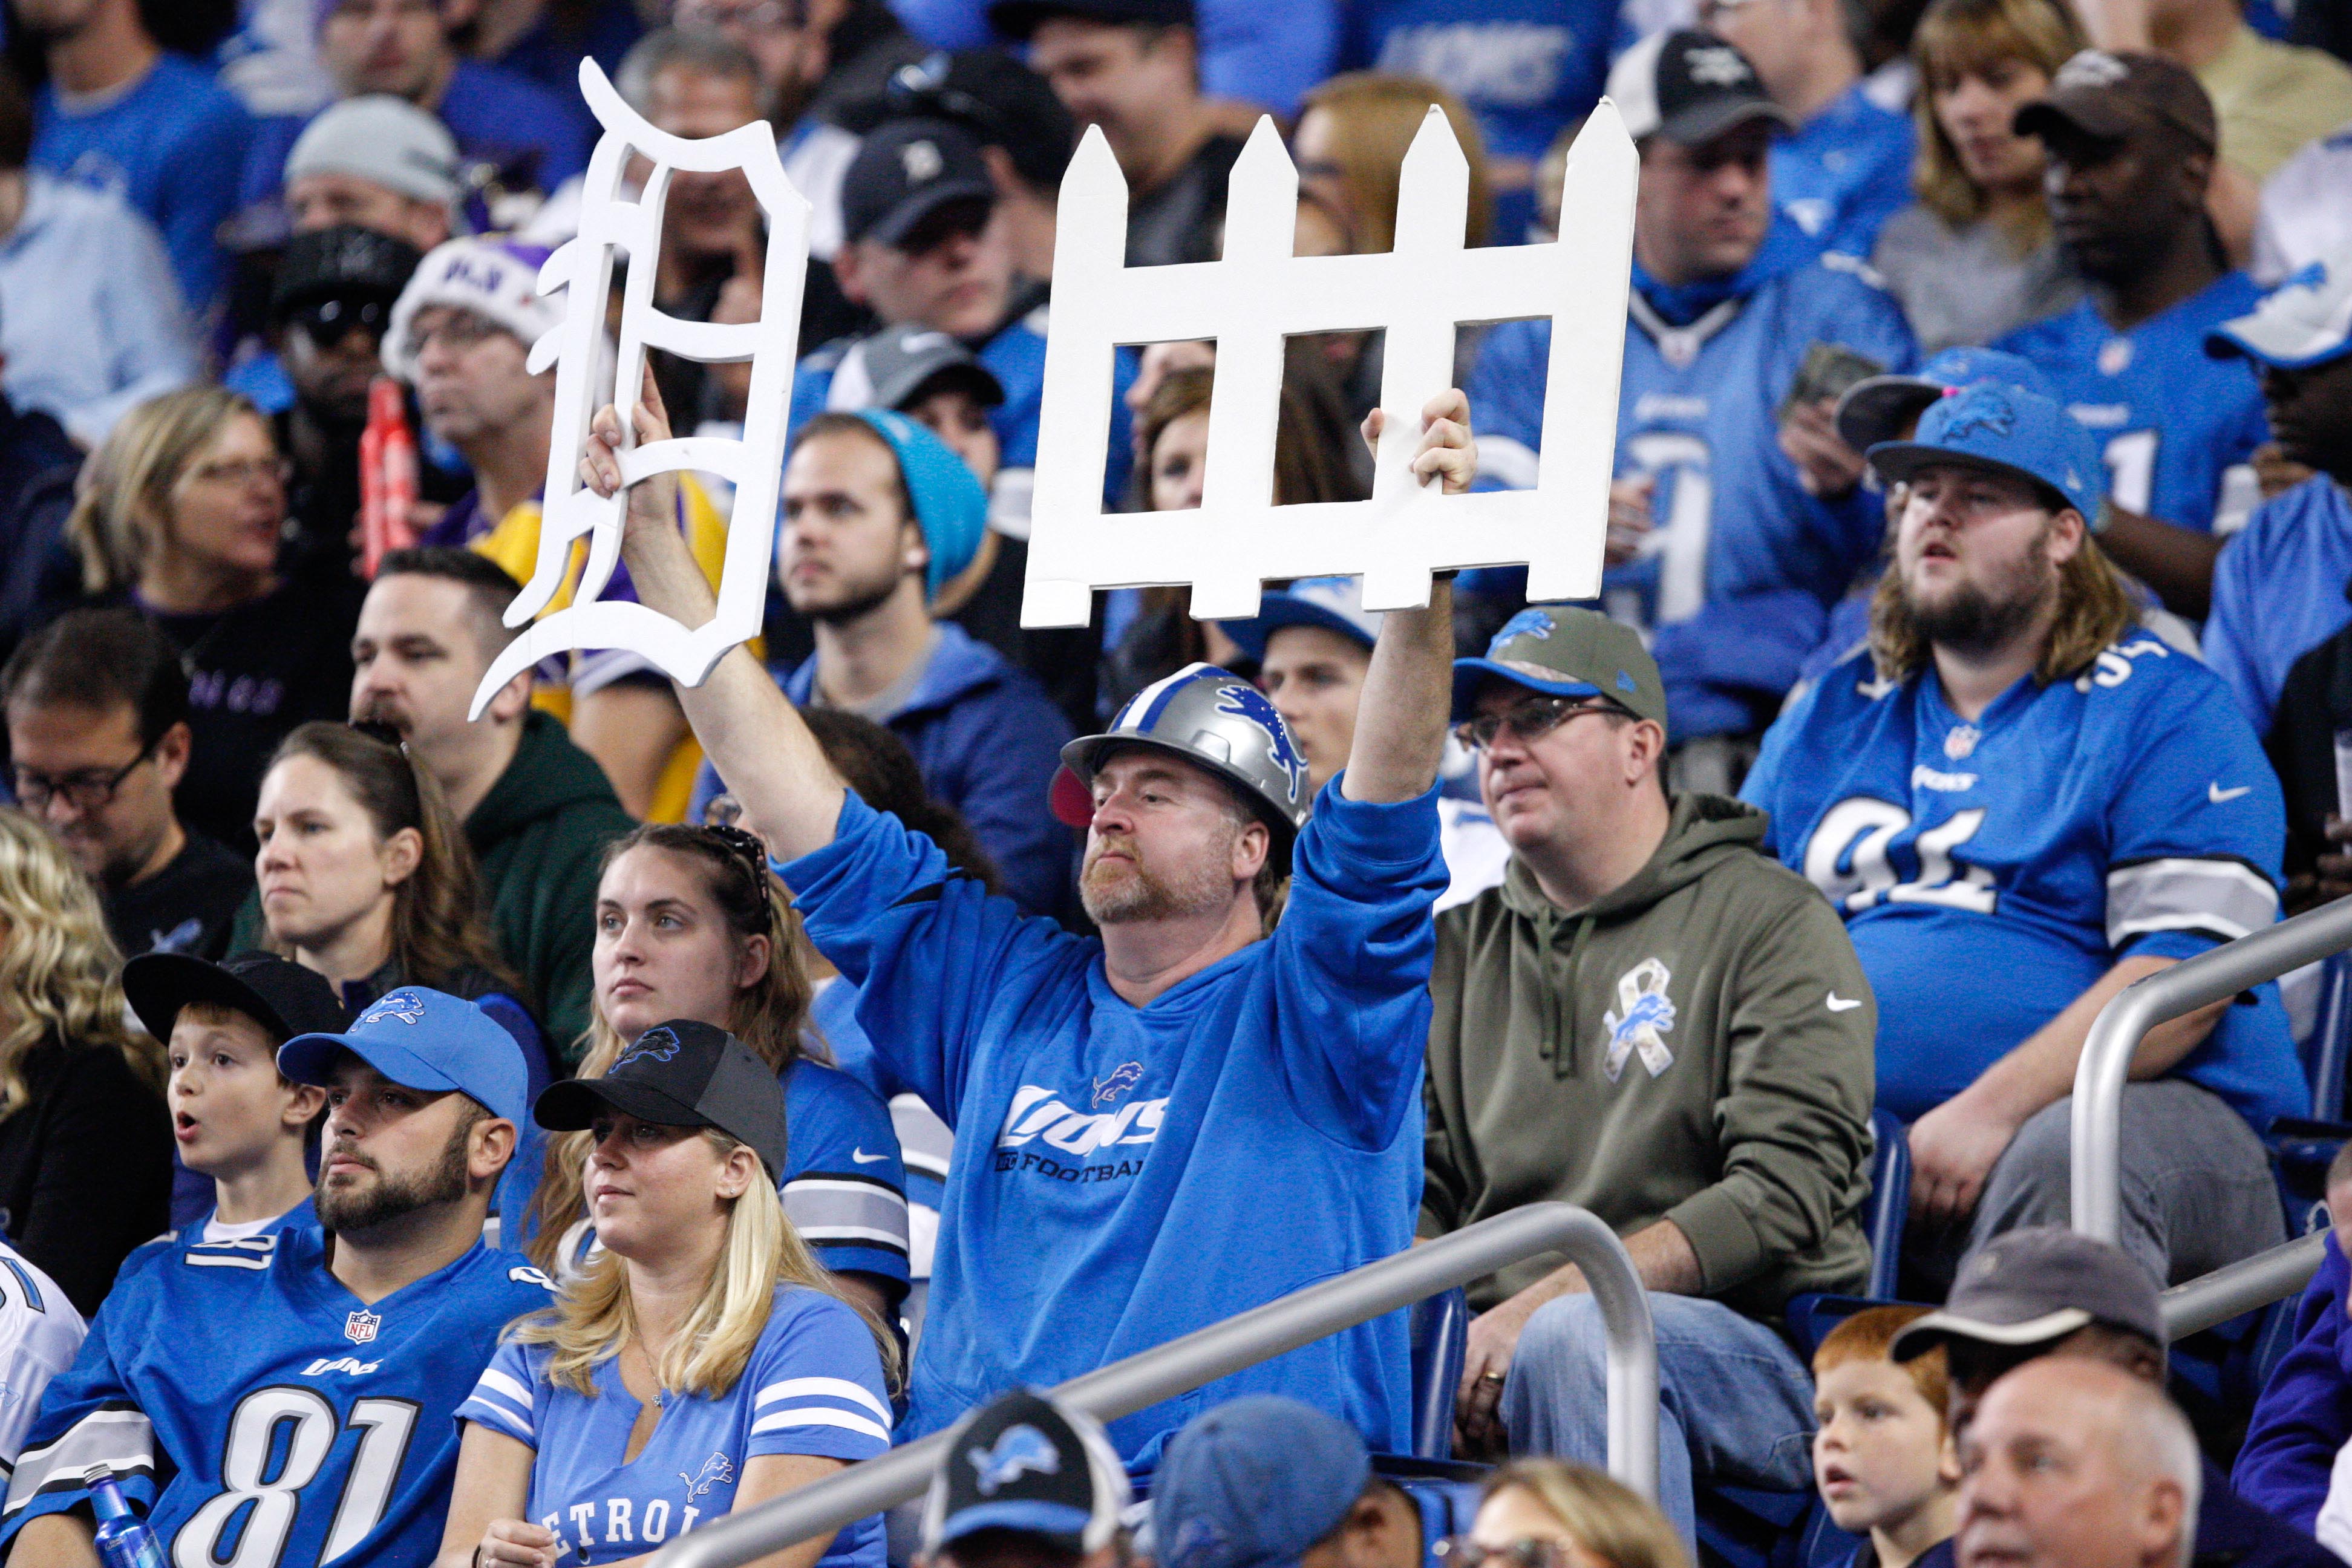 Detroit Lions: Ticket Prices Get Modest Increase for 2017 Season3888 x 2592